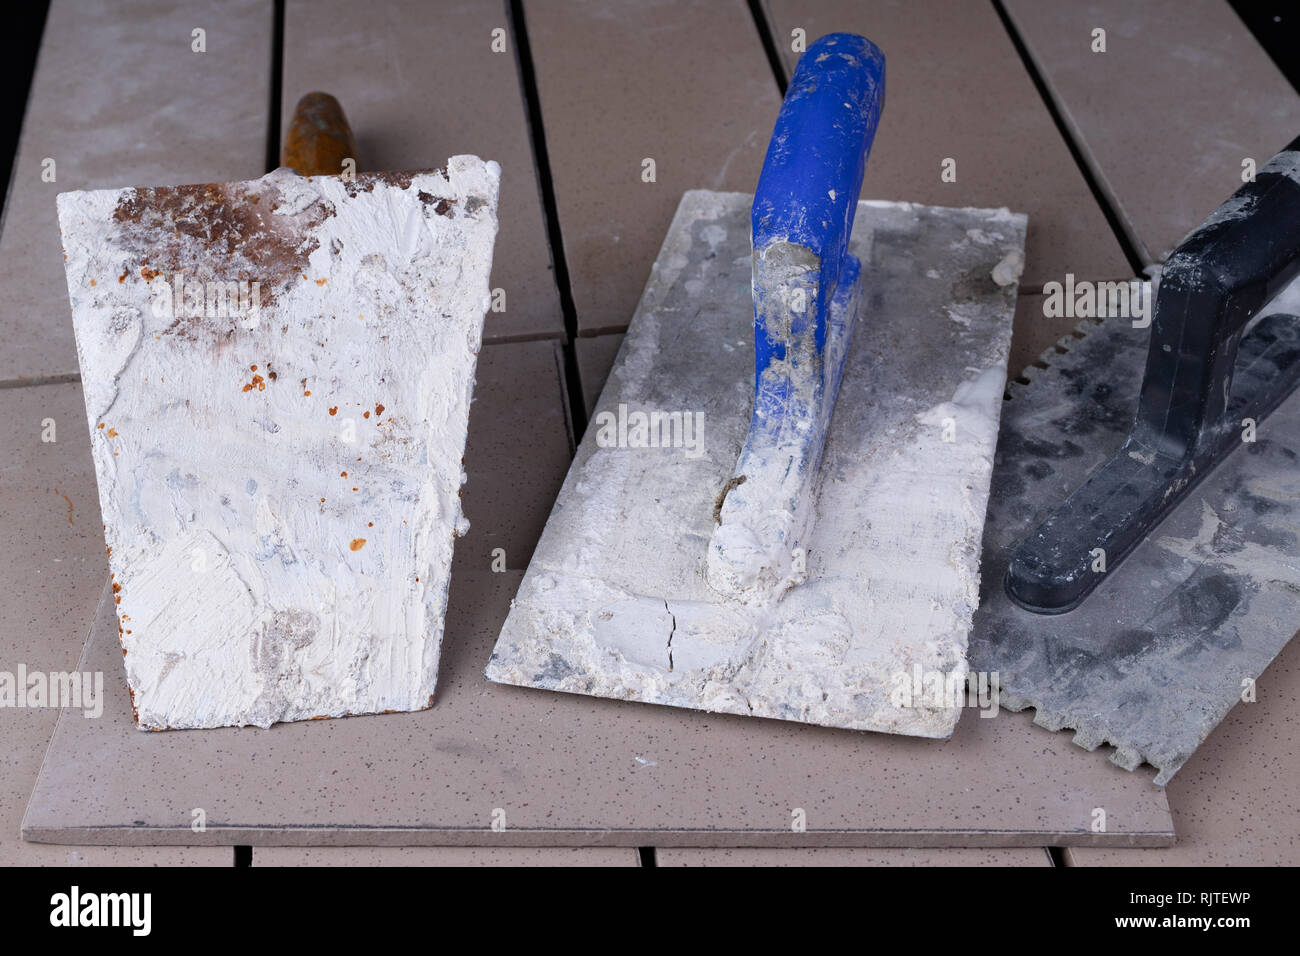 Tiles cut to size and trowels for applying mortar. Masonry accessories on a workshop table. Dark background. Stock Photo